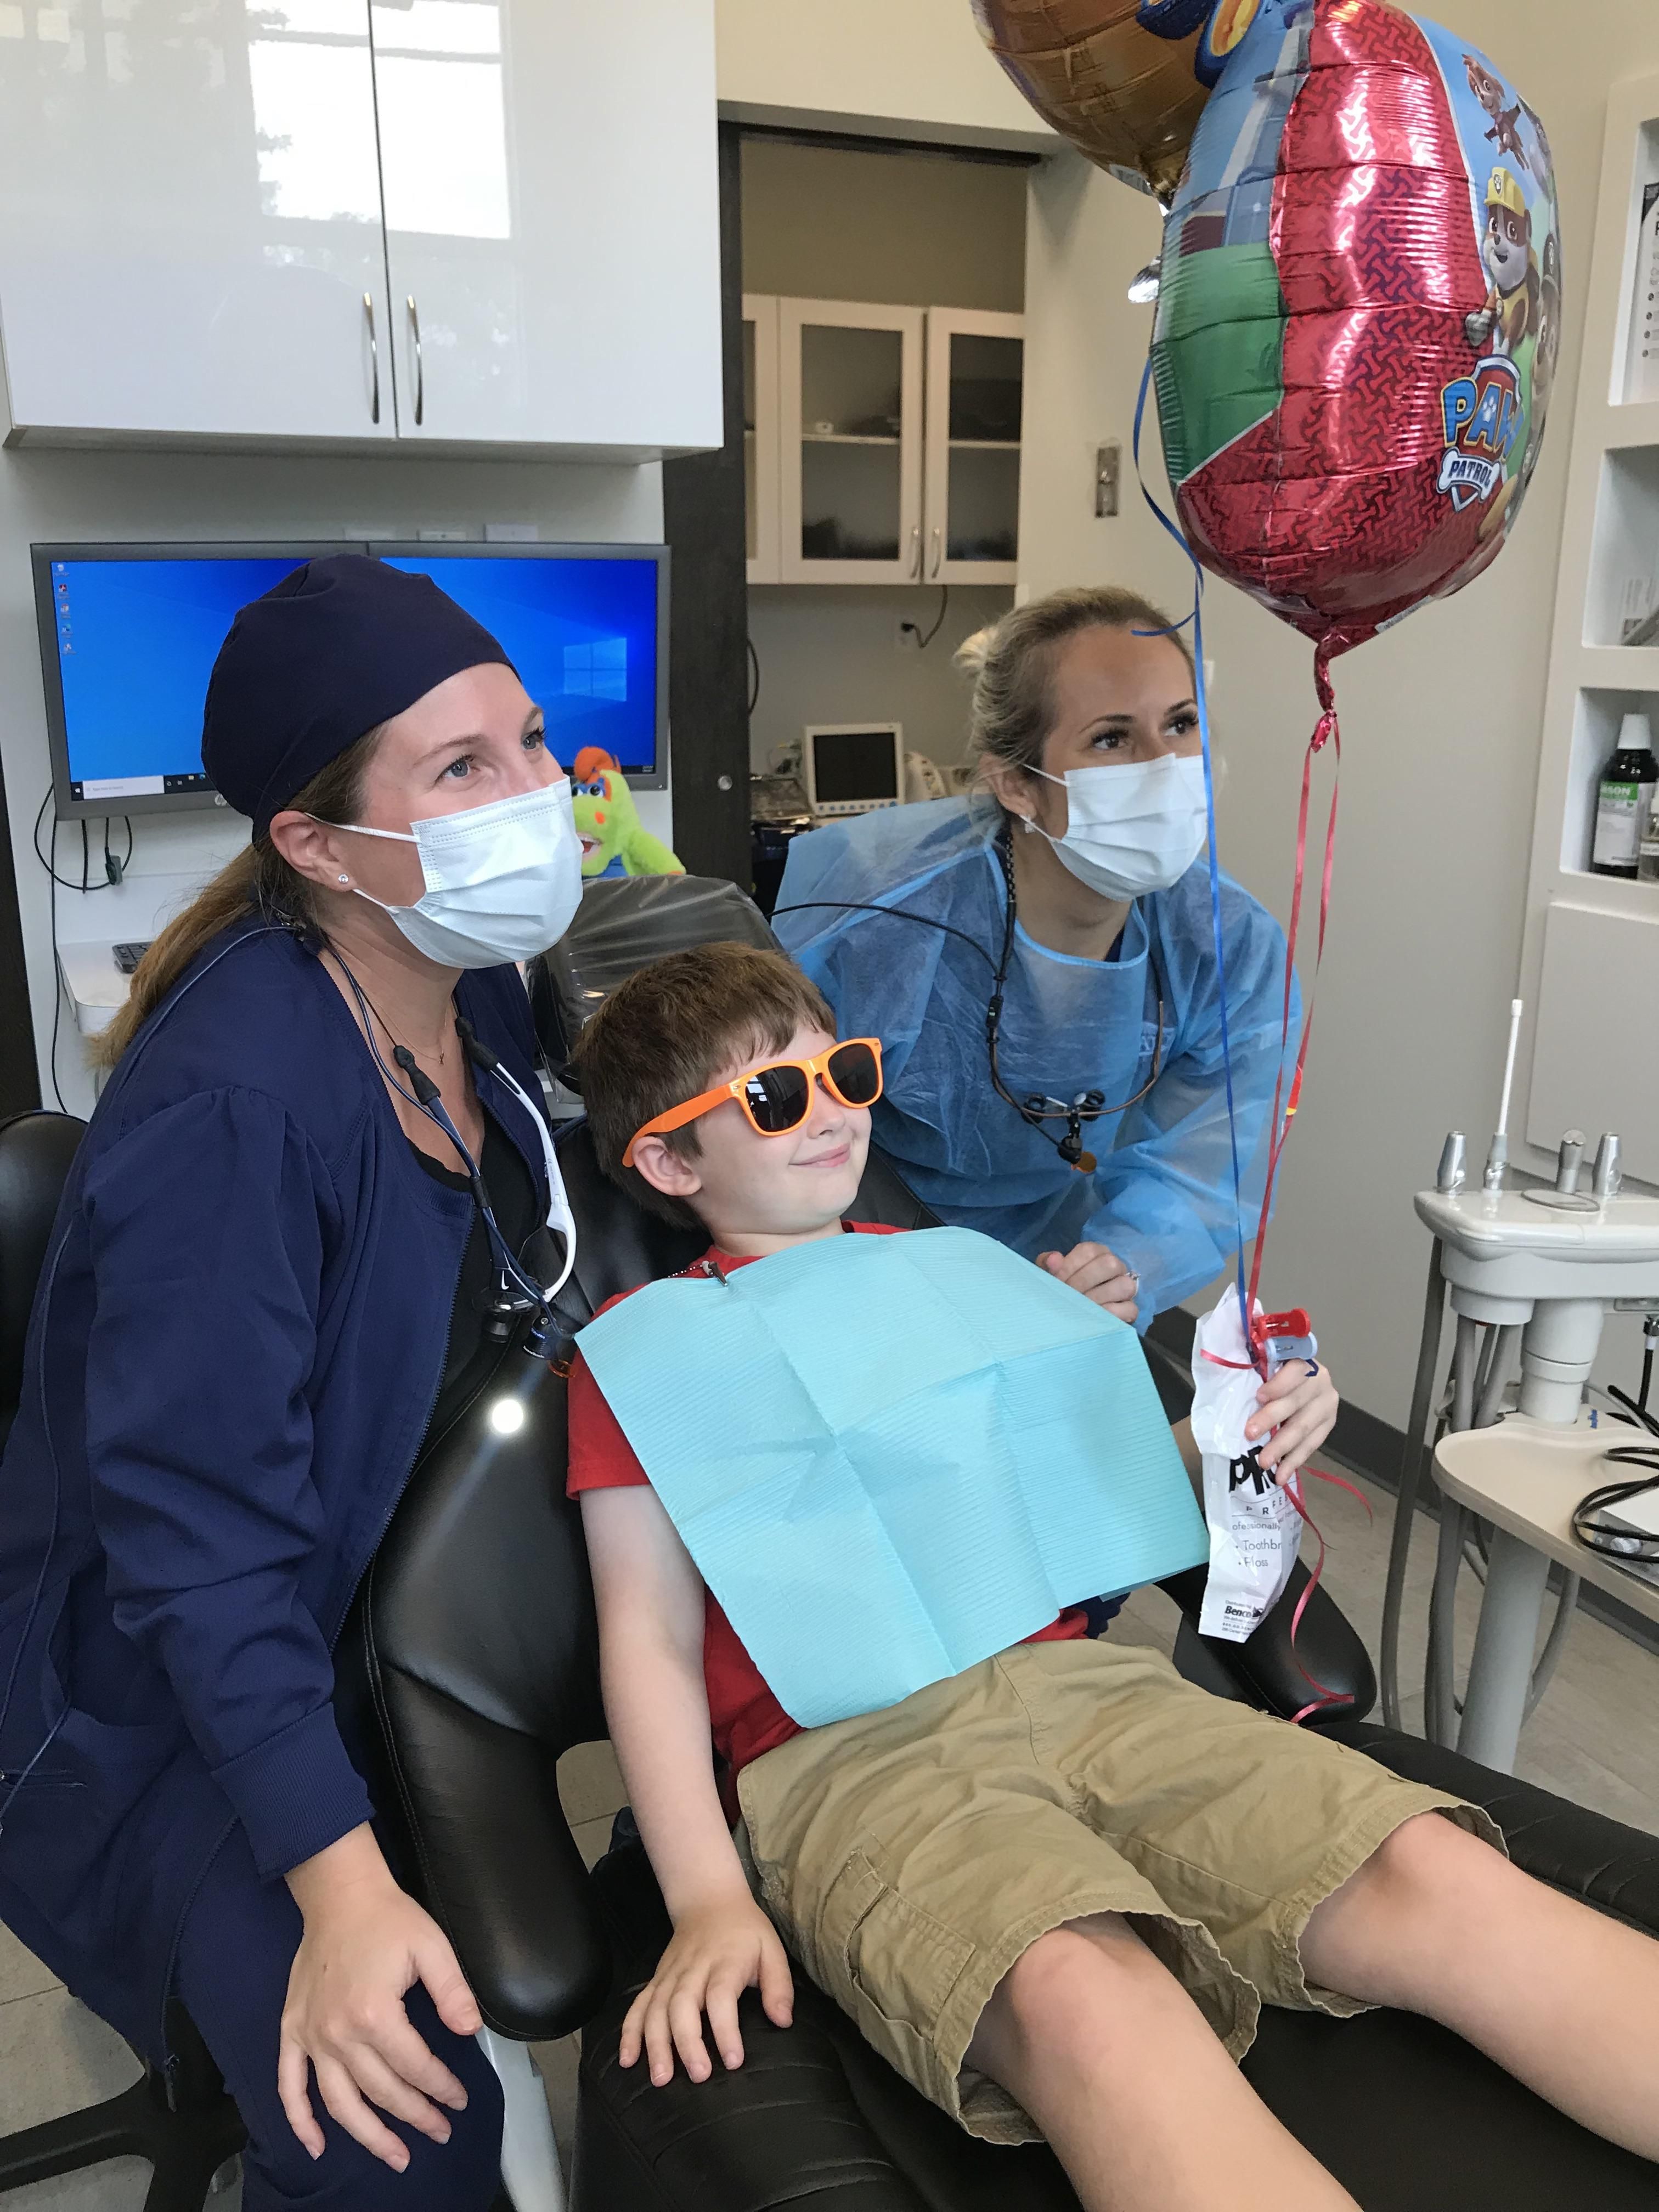 My little brother decided to celebrate his 8th birthday at his favorite place - the dentist